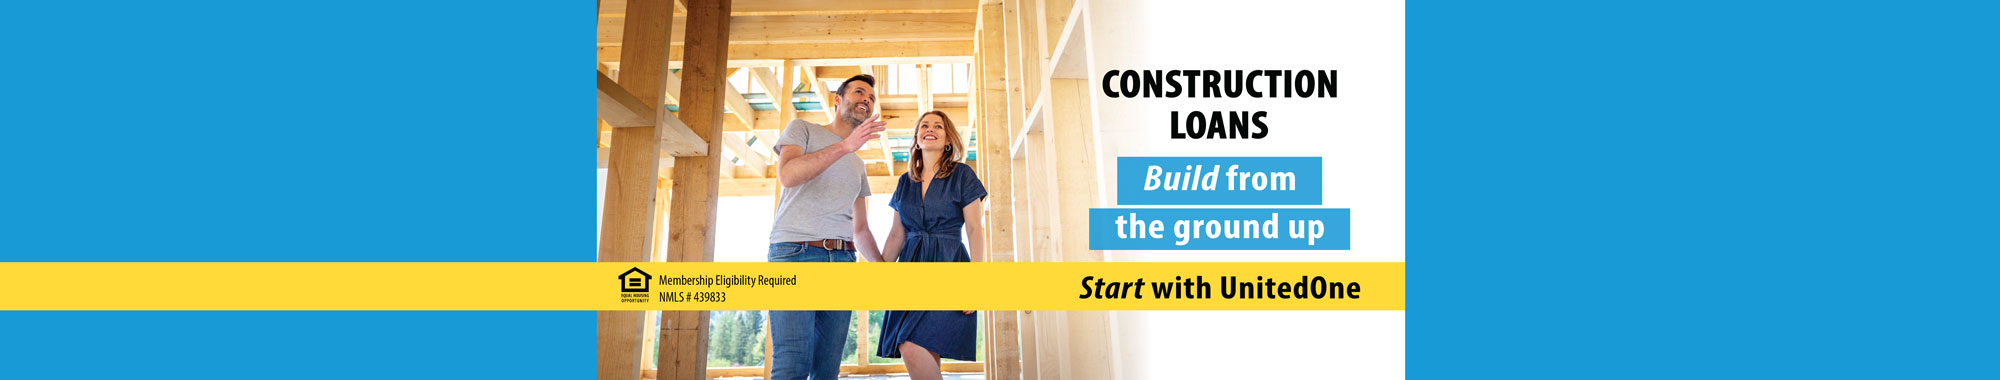 CONSTRUCTION LOANS - Build from the ground up - Start with UnitedOne